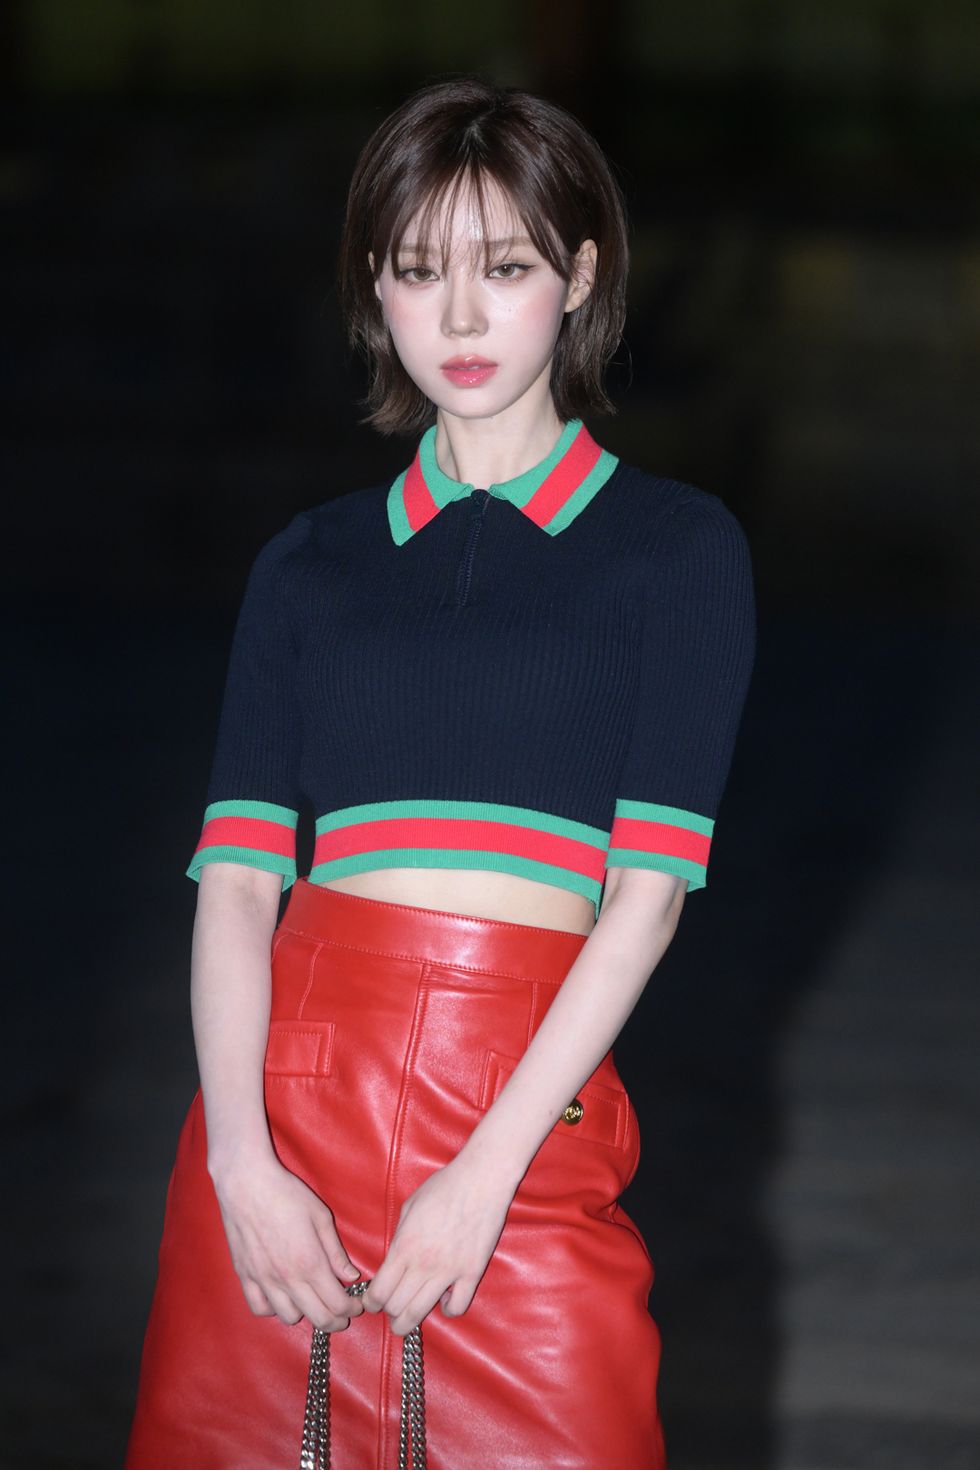 seoul, south korea may 16 winter of k pop girl group aespa attends the gucci seoul cruise 2024 fashion show at gyeongbokgung palace on may 16, 2023 in seoul, south korea photo by the chosunilbo jnsimazins via getty images